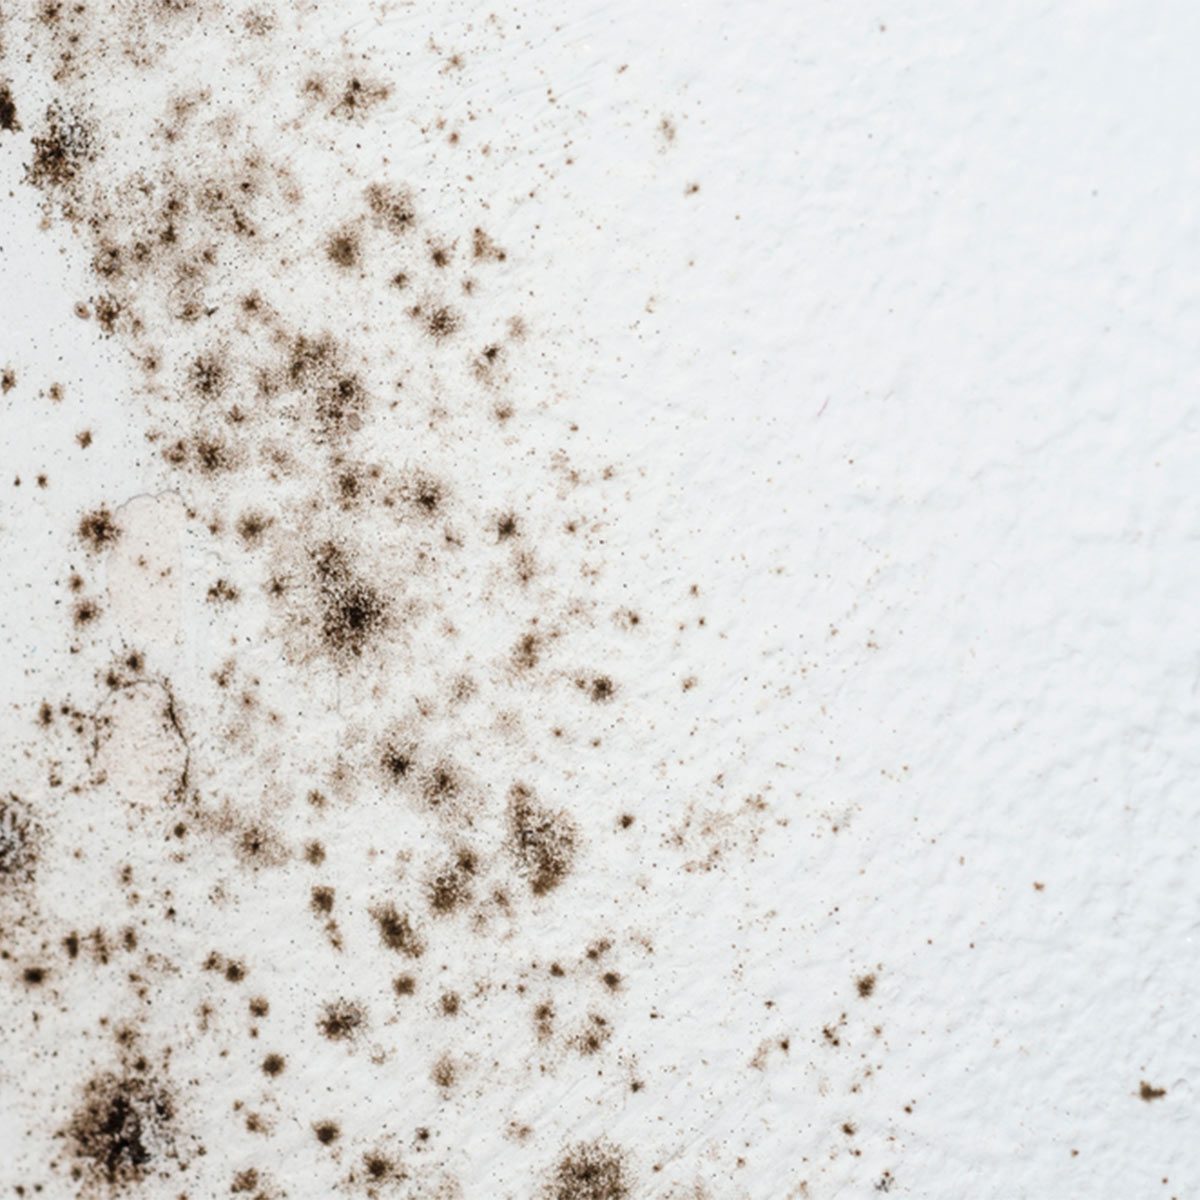 How to Get Rid of Mildew